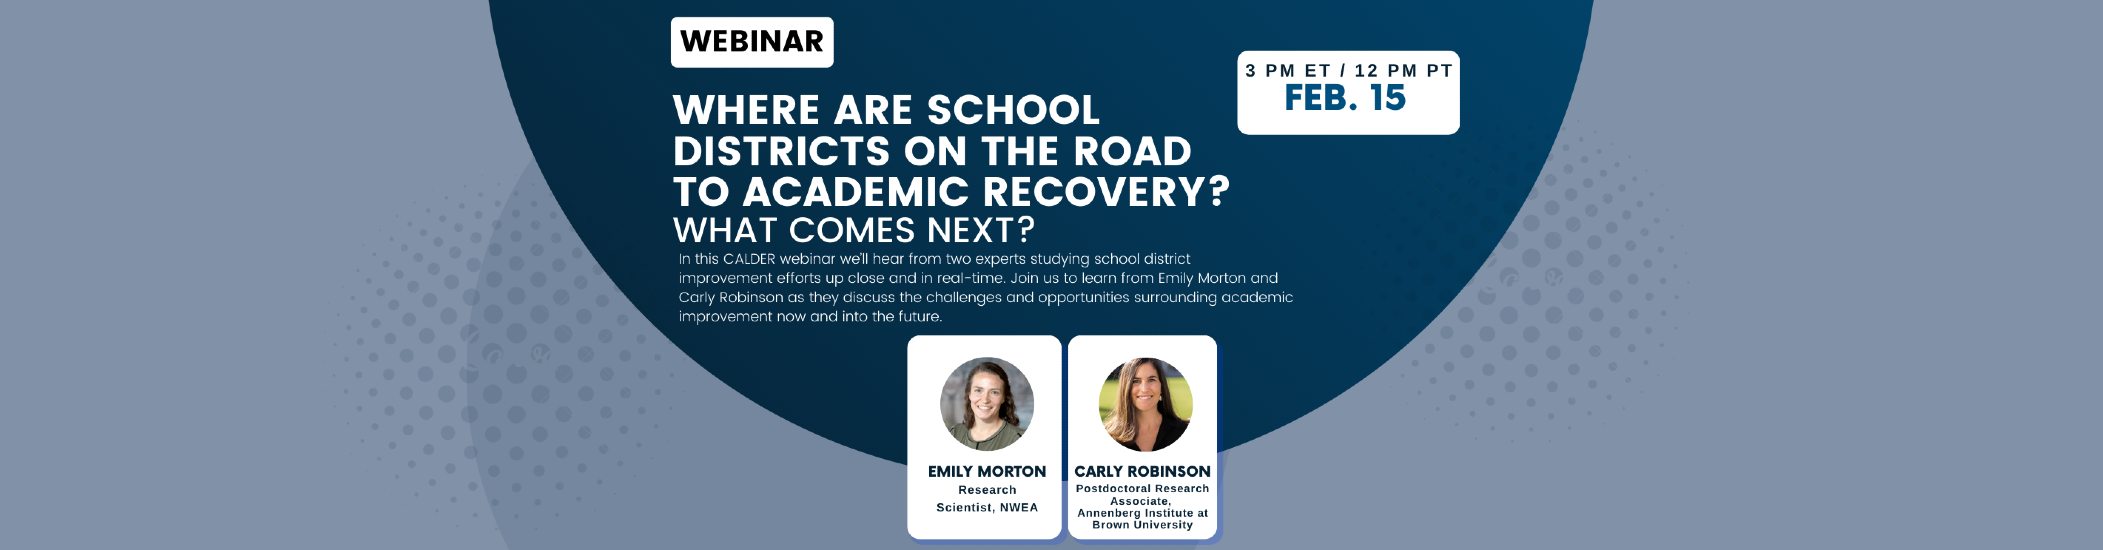 CALDER Webinar: Where are School Districts on the Road to Academic Recovery? What Comes Next?